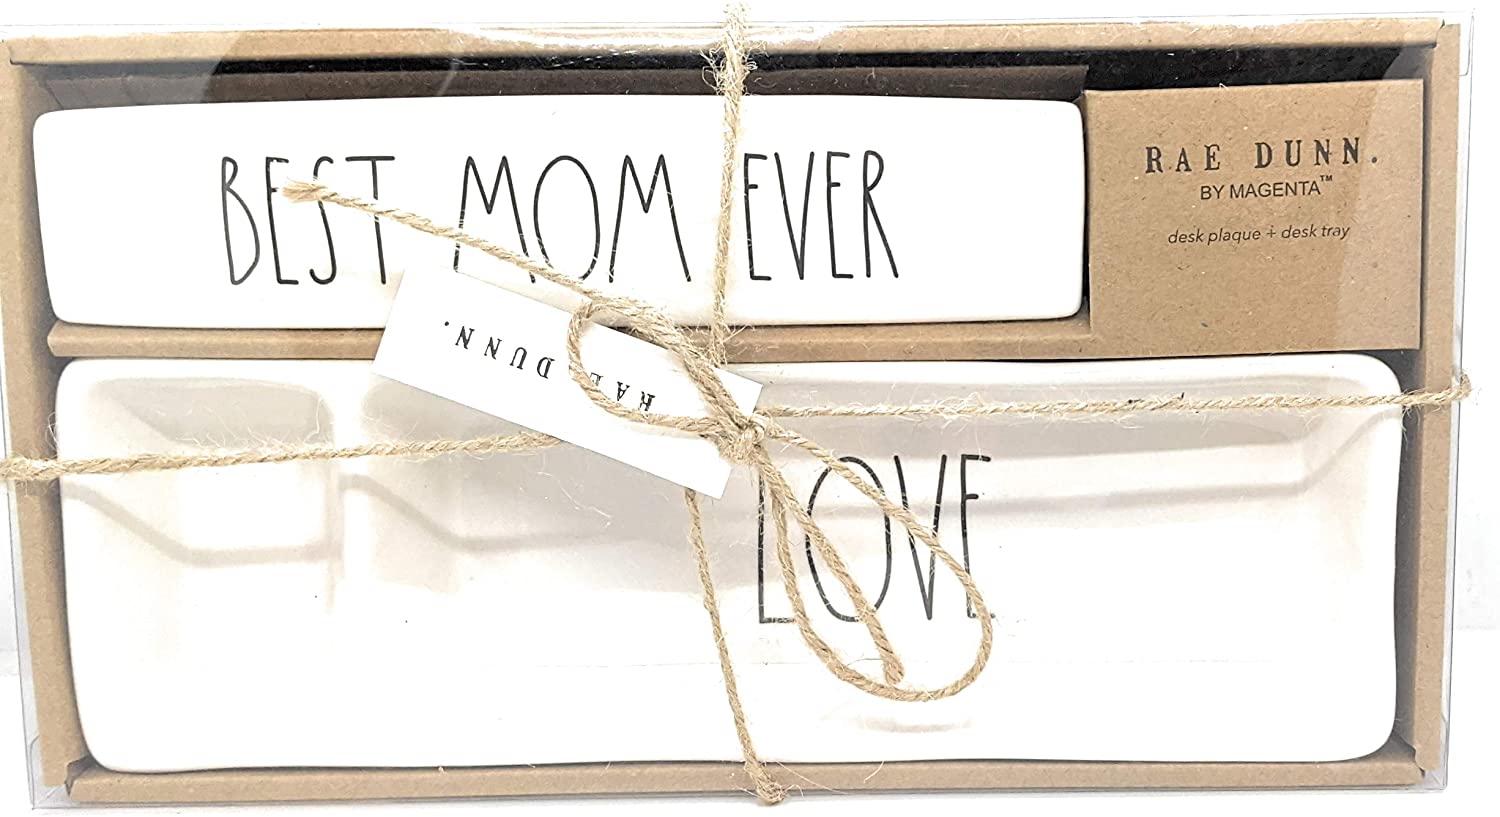 Rae Dunn  2 Piece Set- Desk Name Plate (8.5"x1.75"x1.75") and Desk Organizer in Large Letters LL Gift Set (Best MOM Ever/Love)